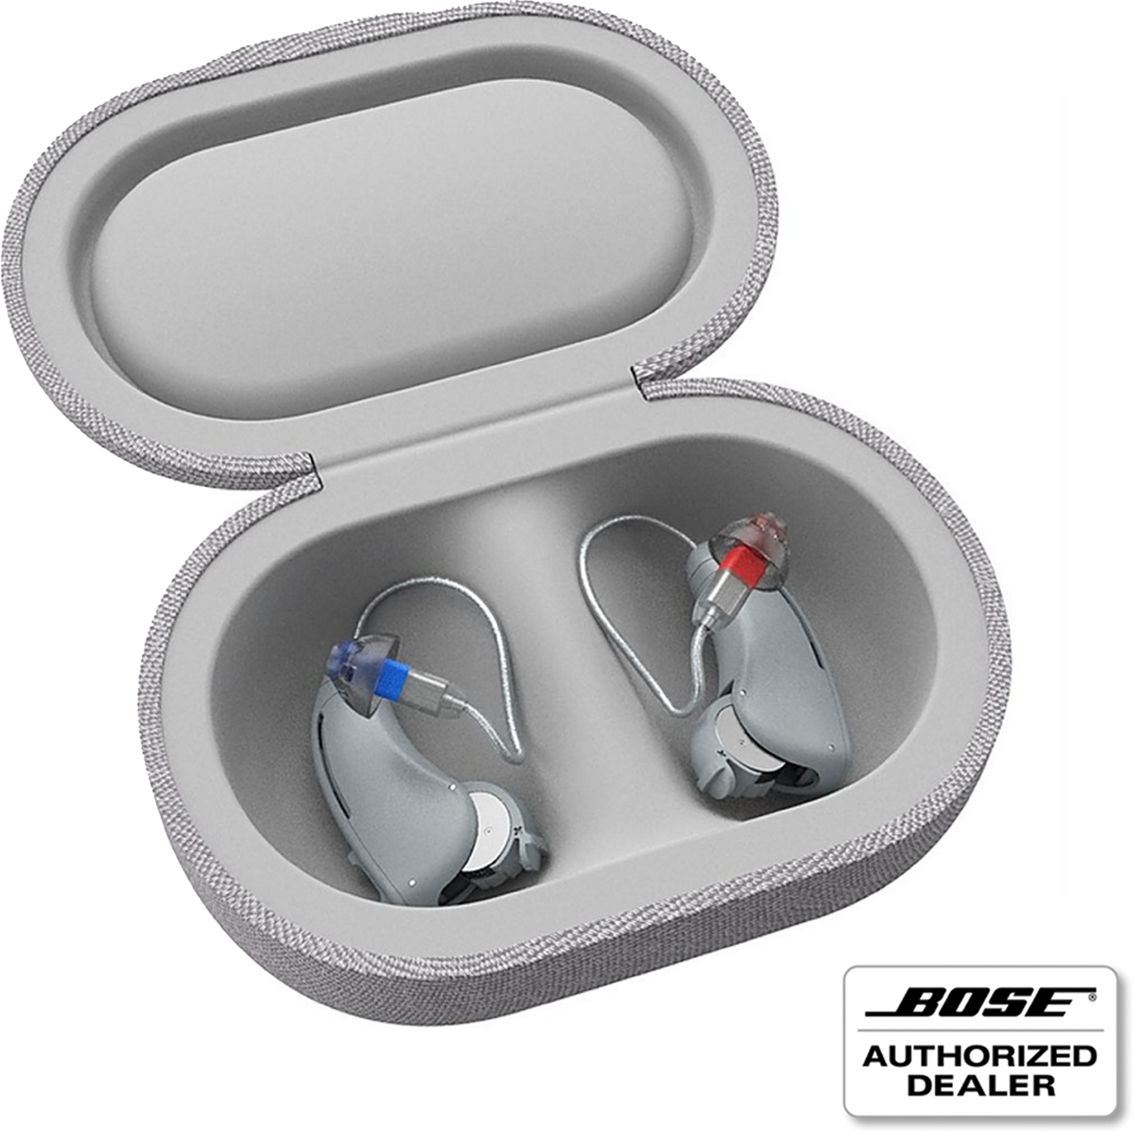 Lexie Hearing B1 Over the Counter Hearing Aid Powered by Bose - Image 6 of 6